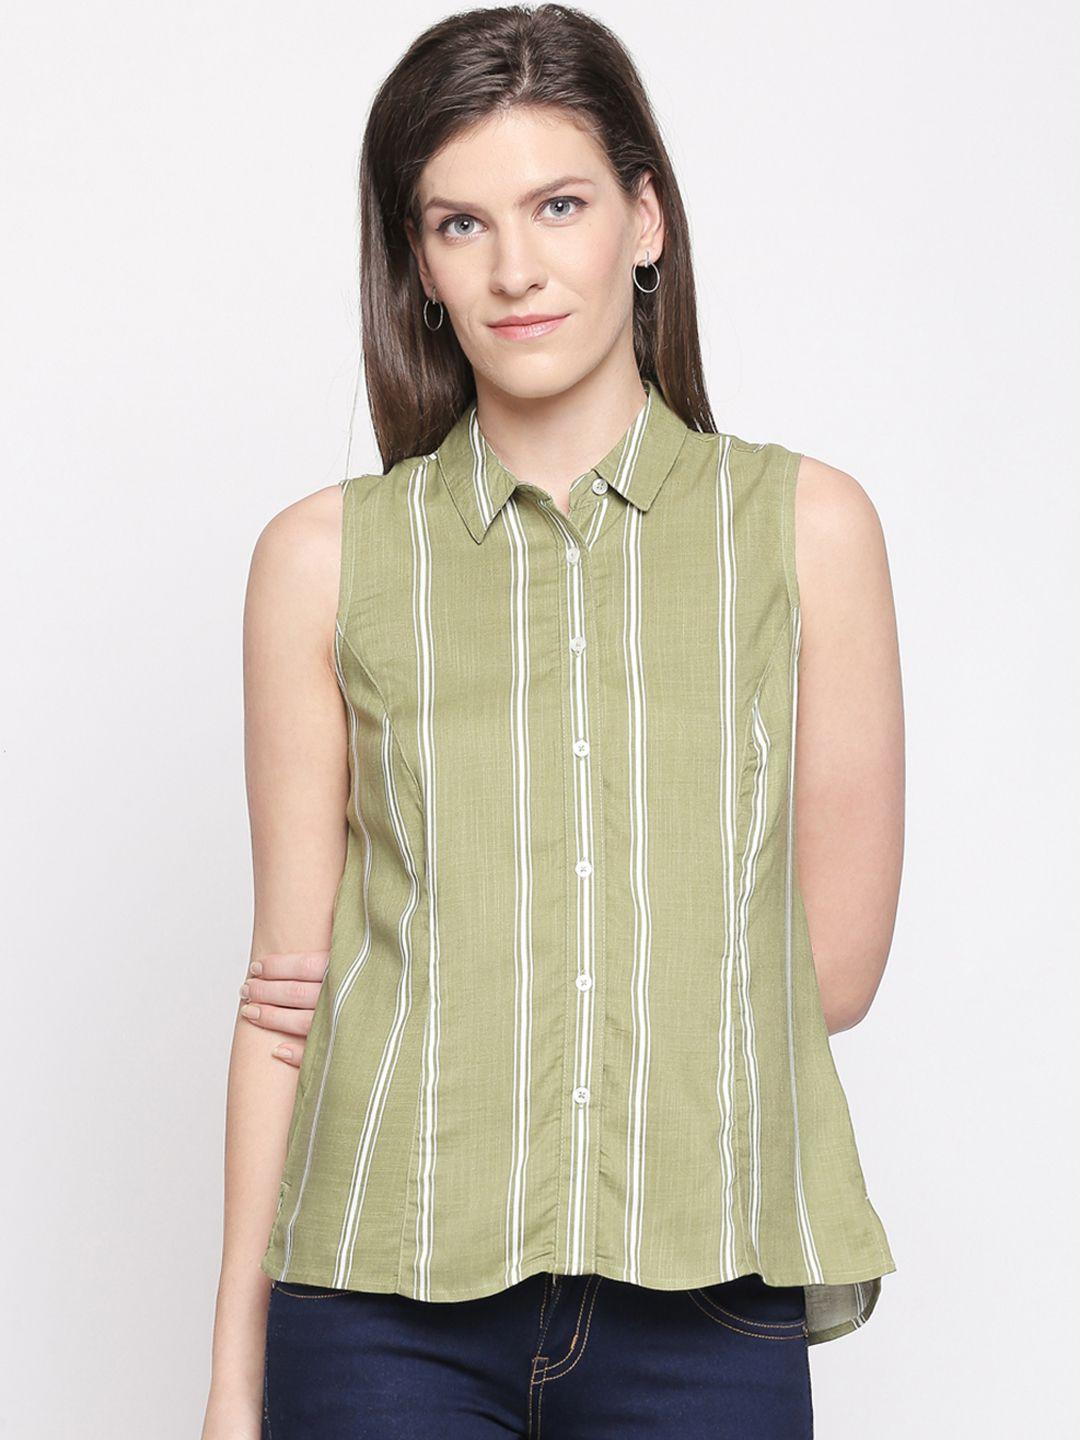 honey by pantaloons women olive green striped shirt style top